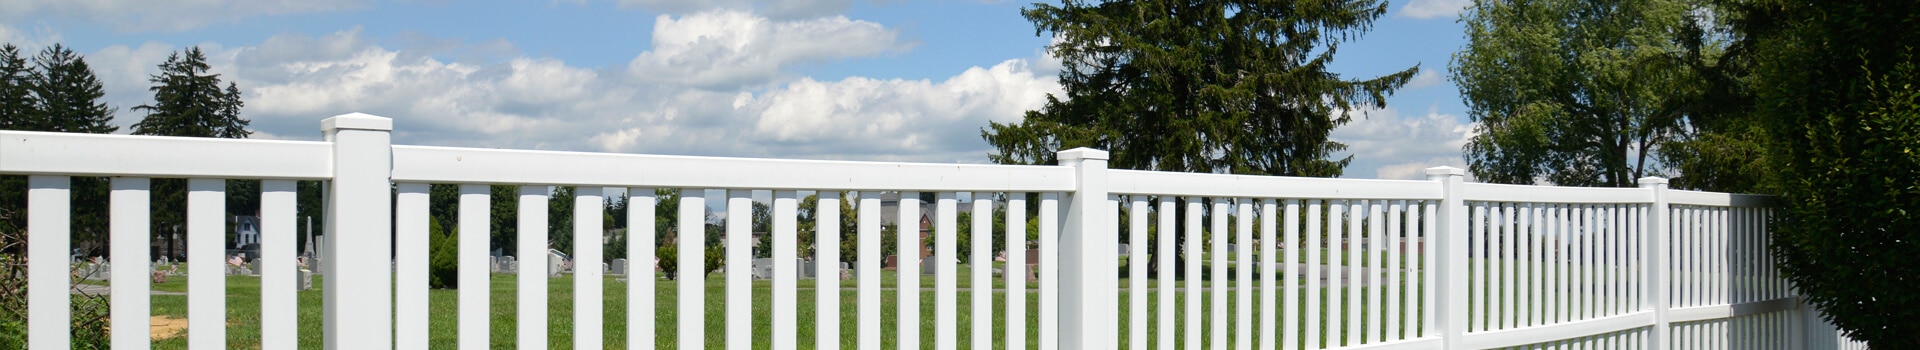 How high should a patio cover be - Big Easy Fences